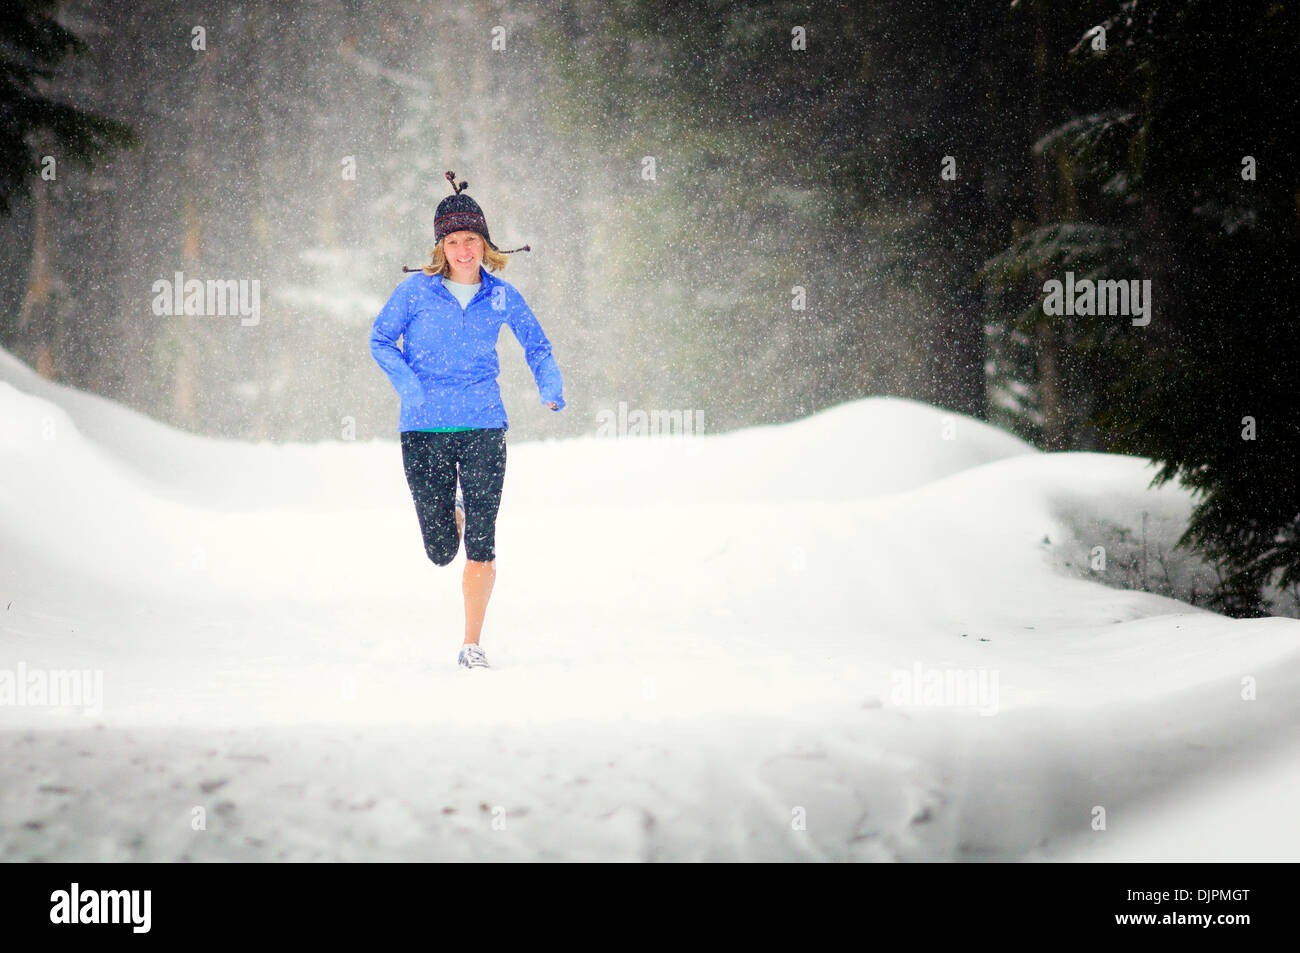 Apr. 01, 2010 - Spokane, Washington, USA - Sara Ranson is an elite runner with the running club Team Swift based out of Spokane, Washington. She runs at Mt. Spokane Ski Resort on a snowy spring day dressed in winter running gear and running through evergreen trees, snow, trails on a cloudy winter like day. (Credit Image: © Jed Conklin/ZUMApress.com) Stock Photo